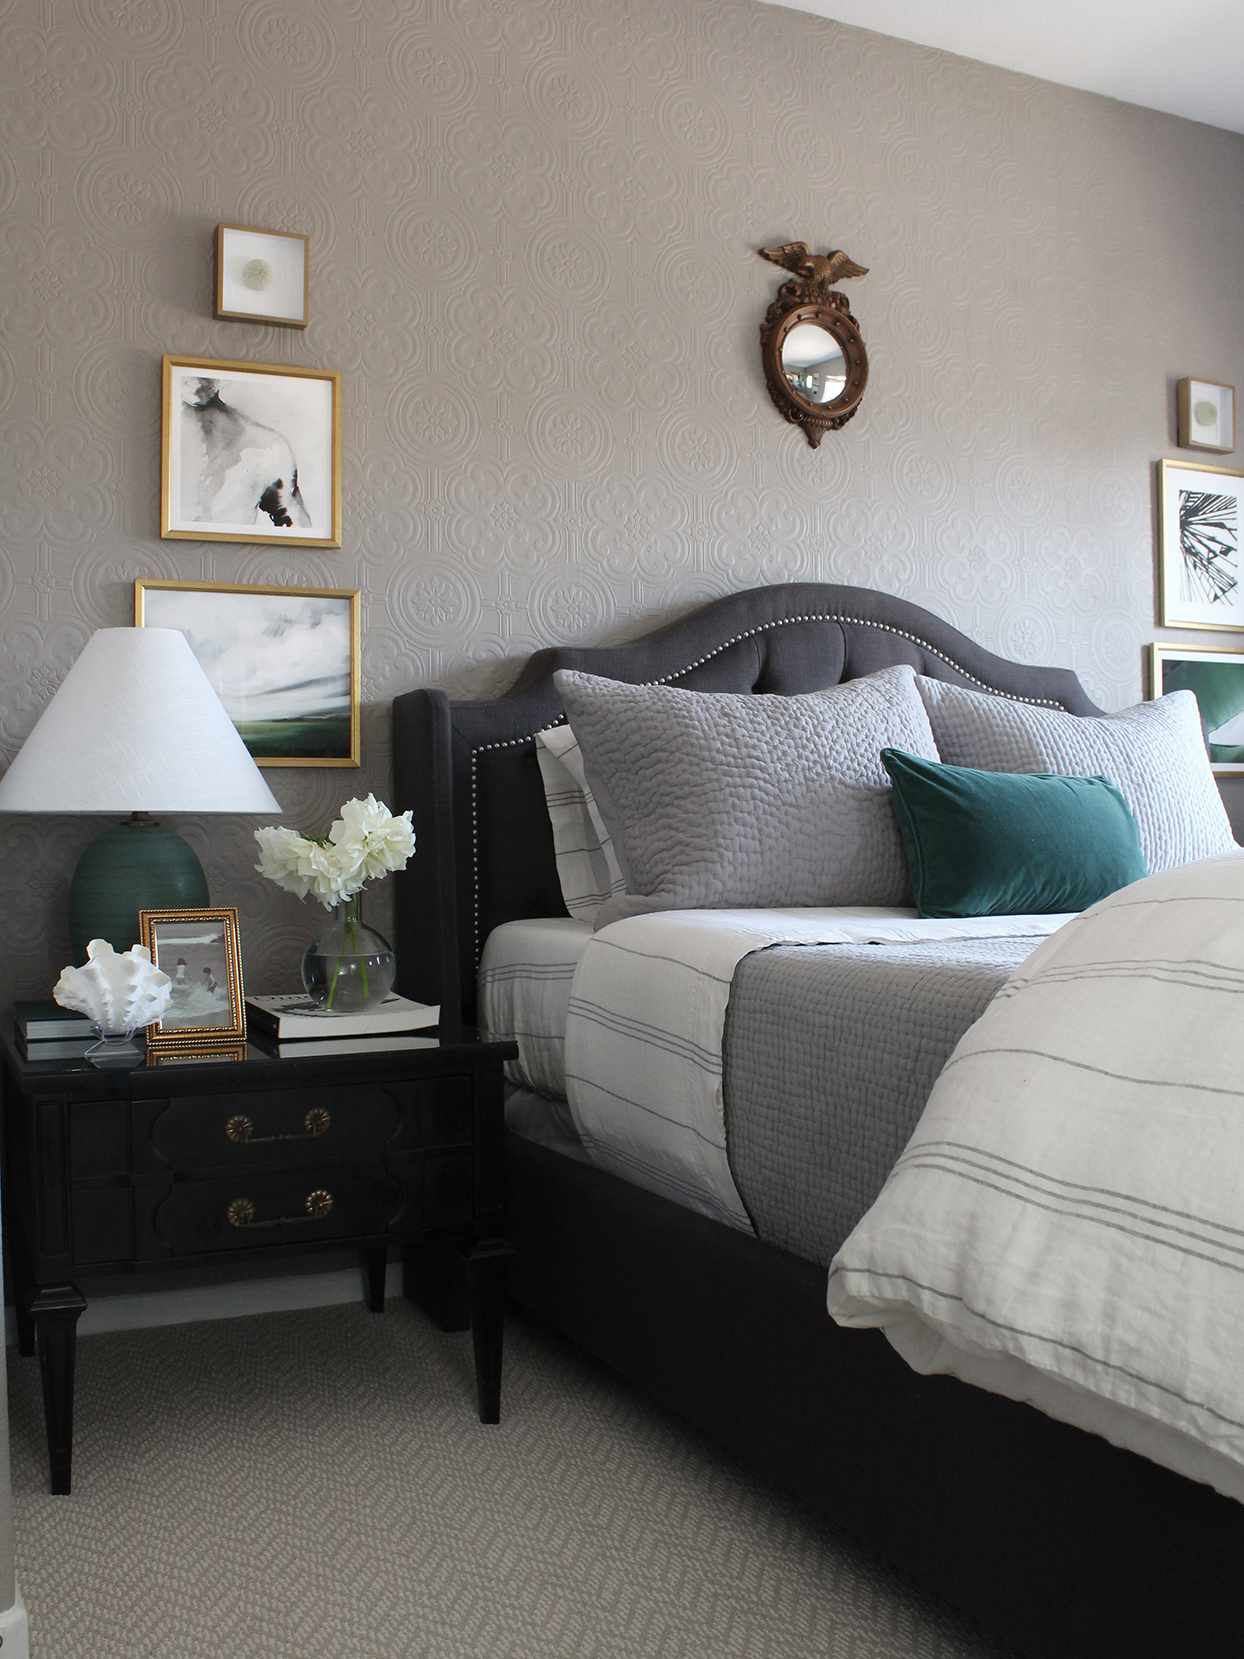 bedroom with gray walls gray headboard black nightstand with table lamp and gold-framed art hung on wall